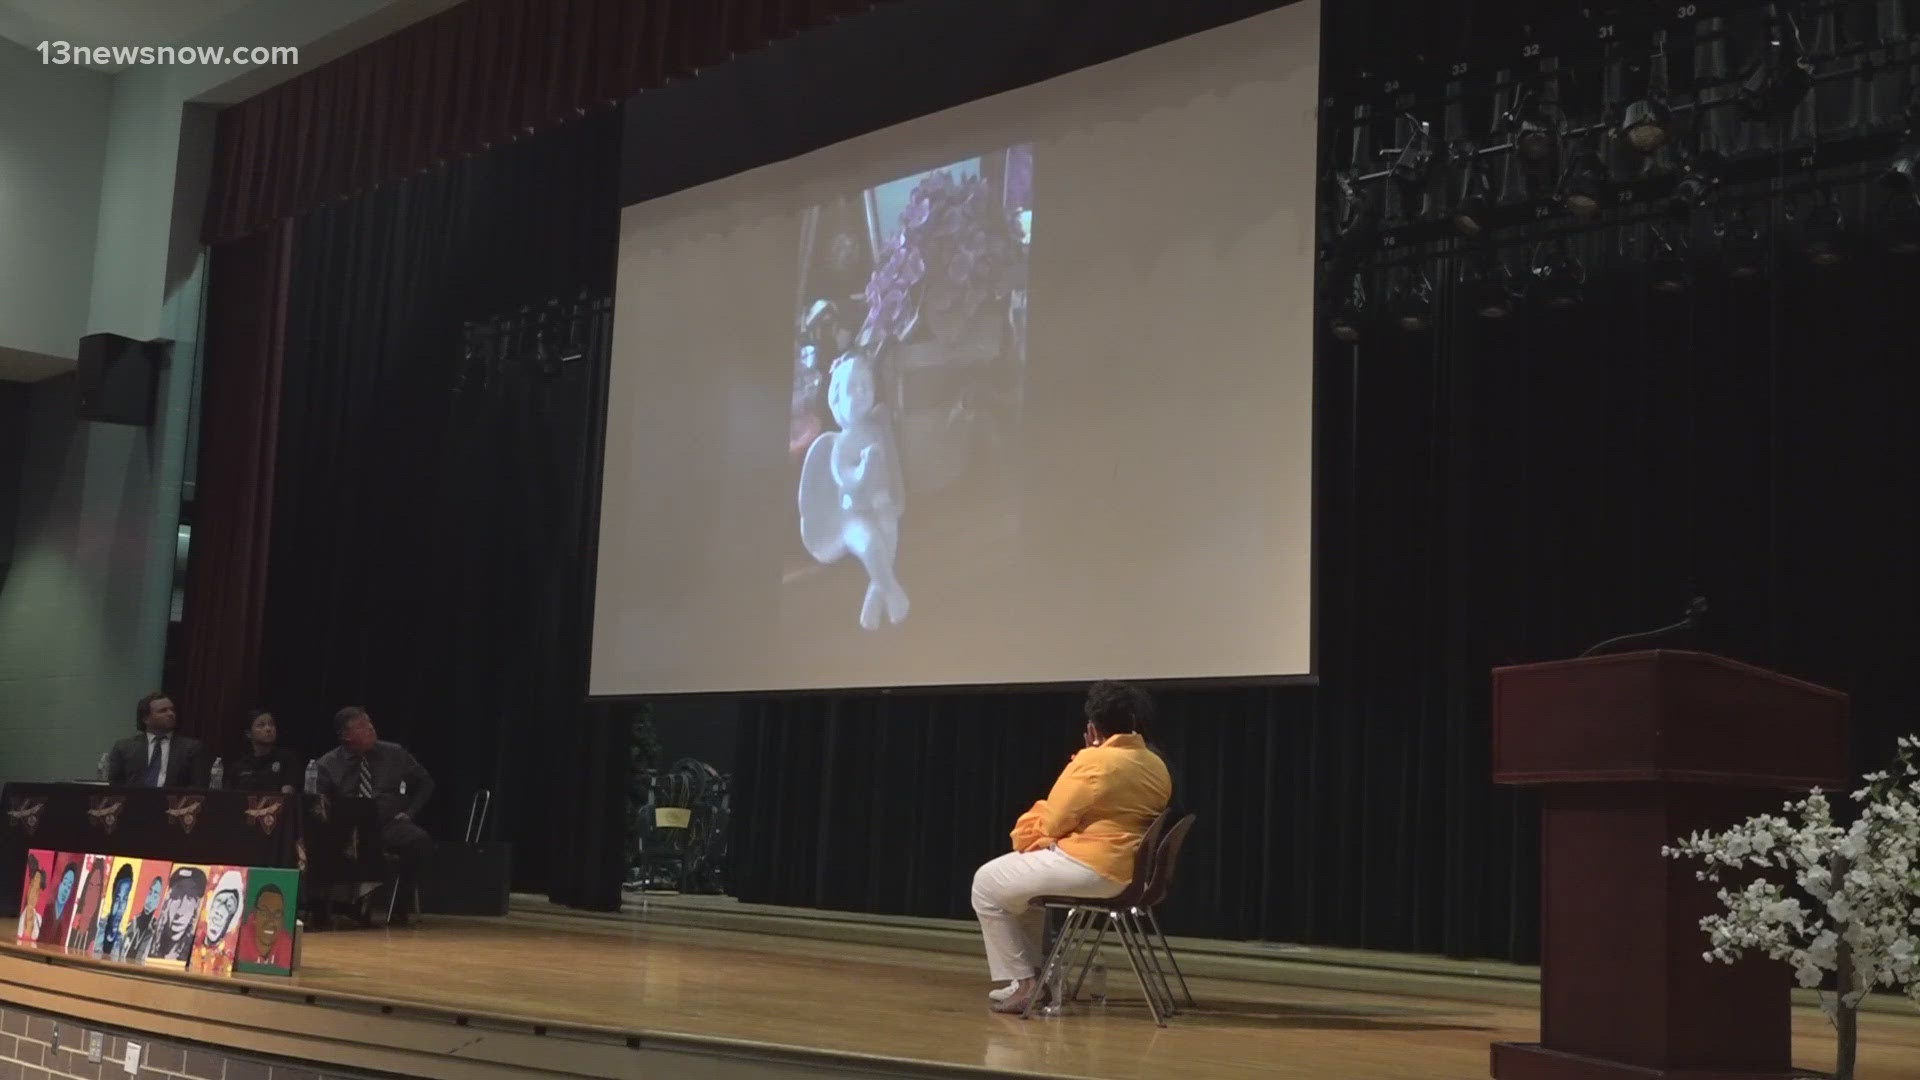 Over in Suffolk, school administrators held a meeting to spread awareness about gang violence.